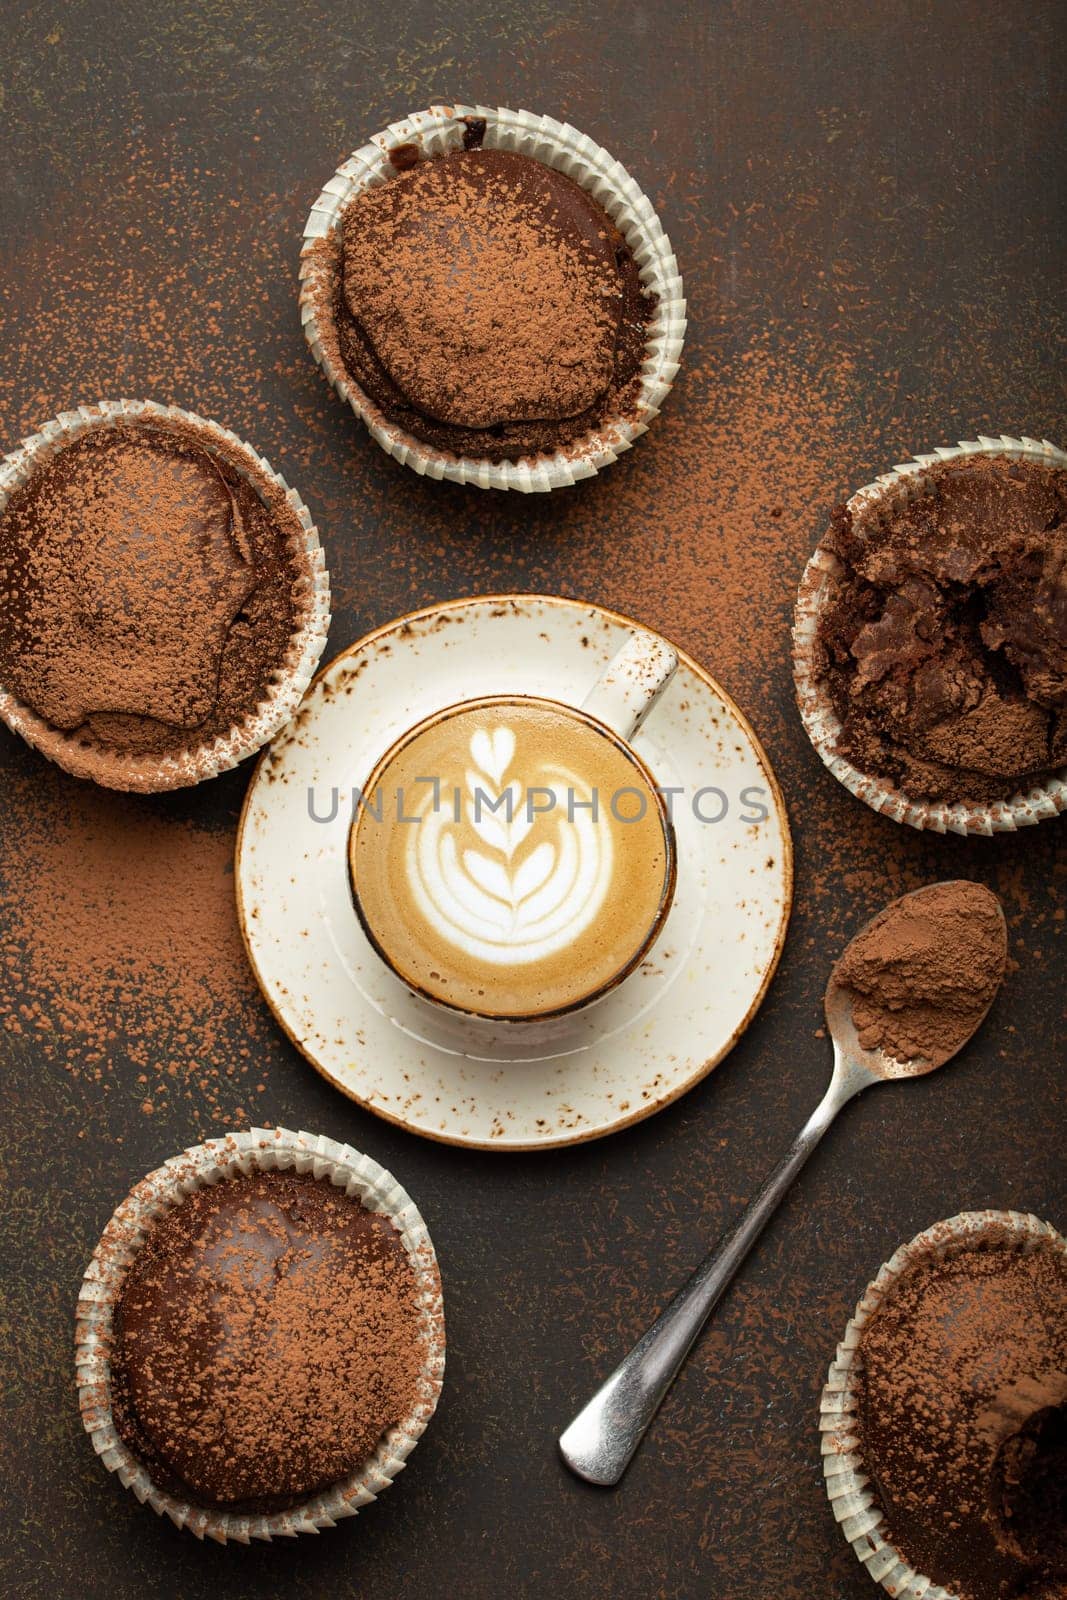 Chocolate and cocoa browny muffins with coffee cappuccino in cup top view on brown rustic stone background, sweet homemade dark chocolate cupcakes by its_al_dente